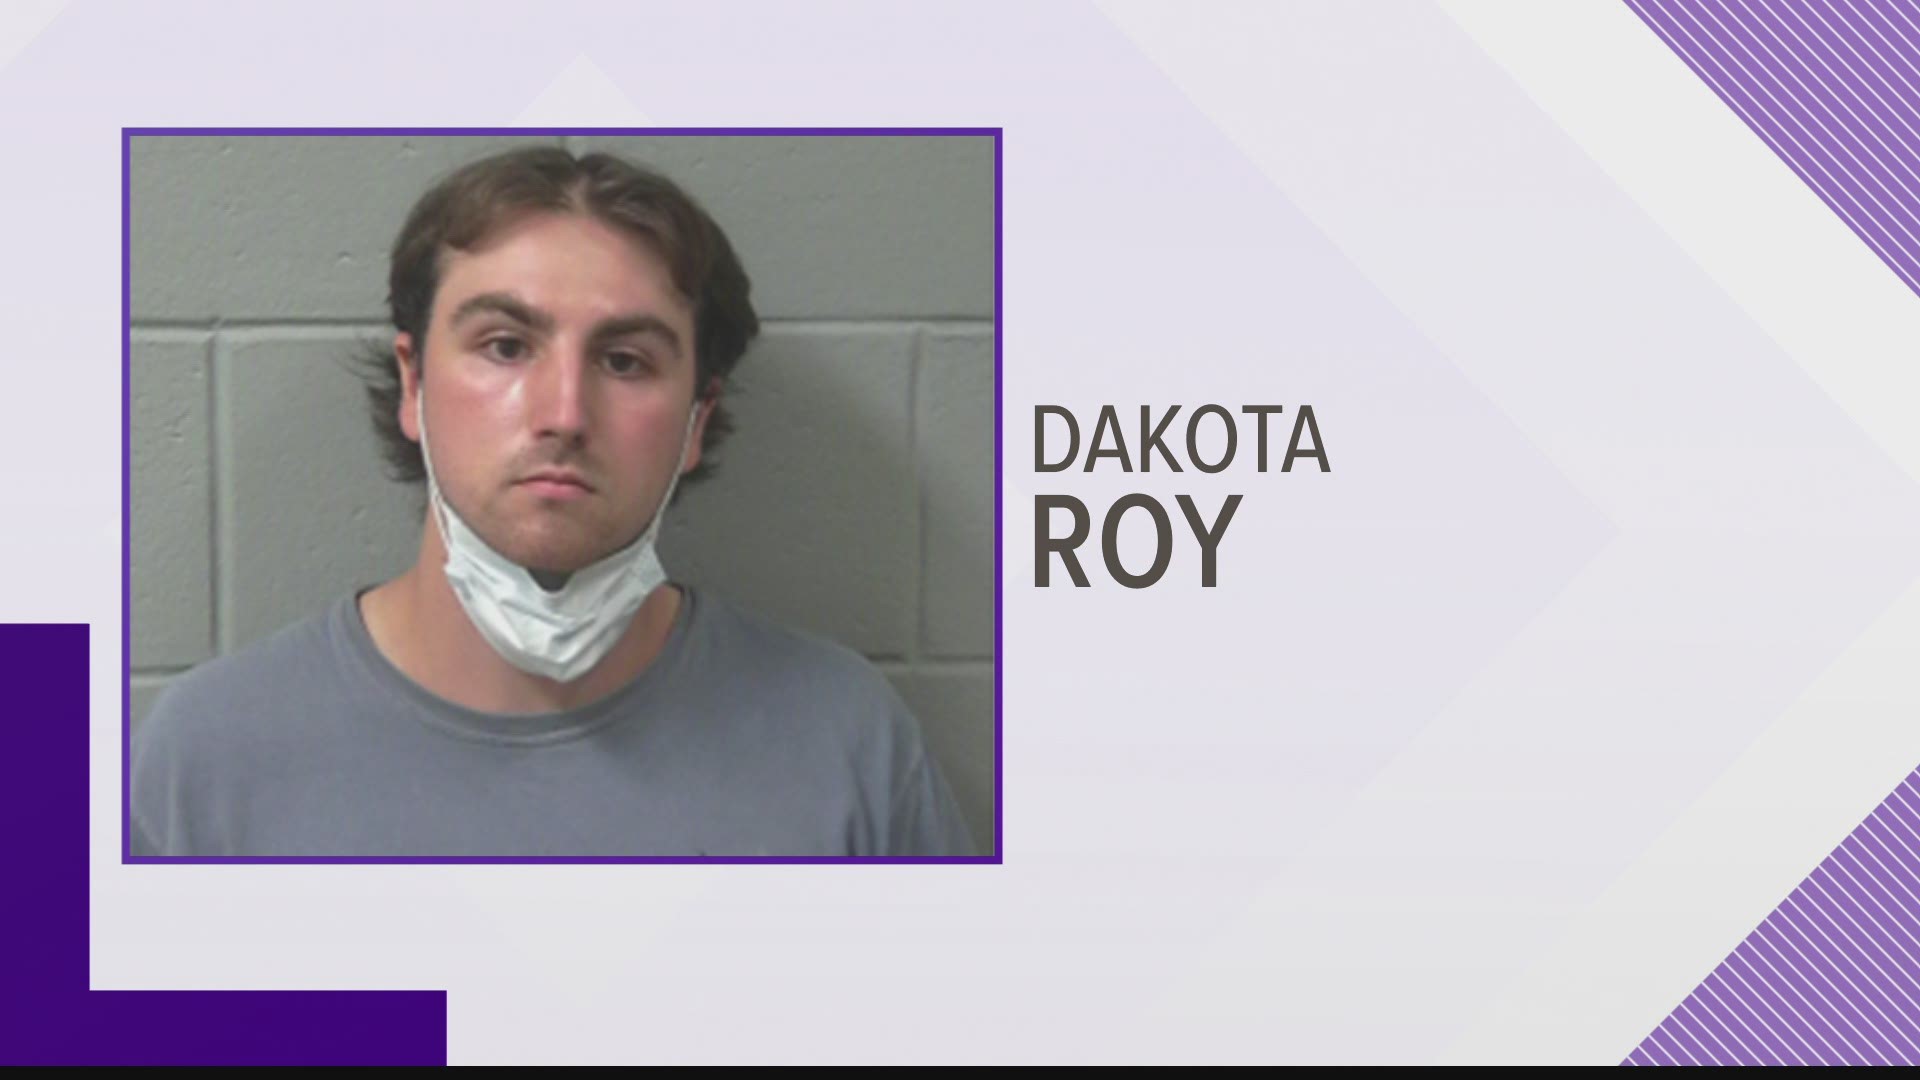 Dakota Roy is also alleged to have secretively photographed an individual, resulting in the misdemeanor charge of violation of privacy.